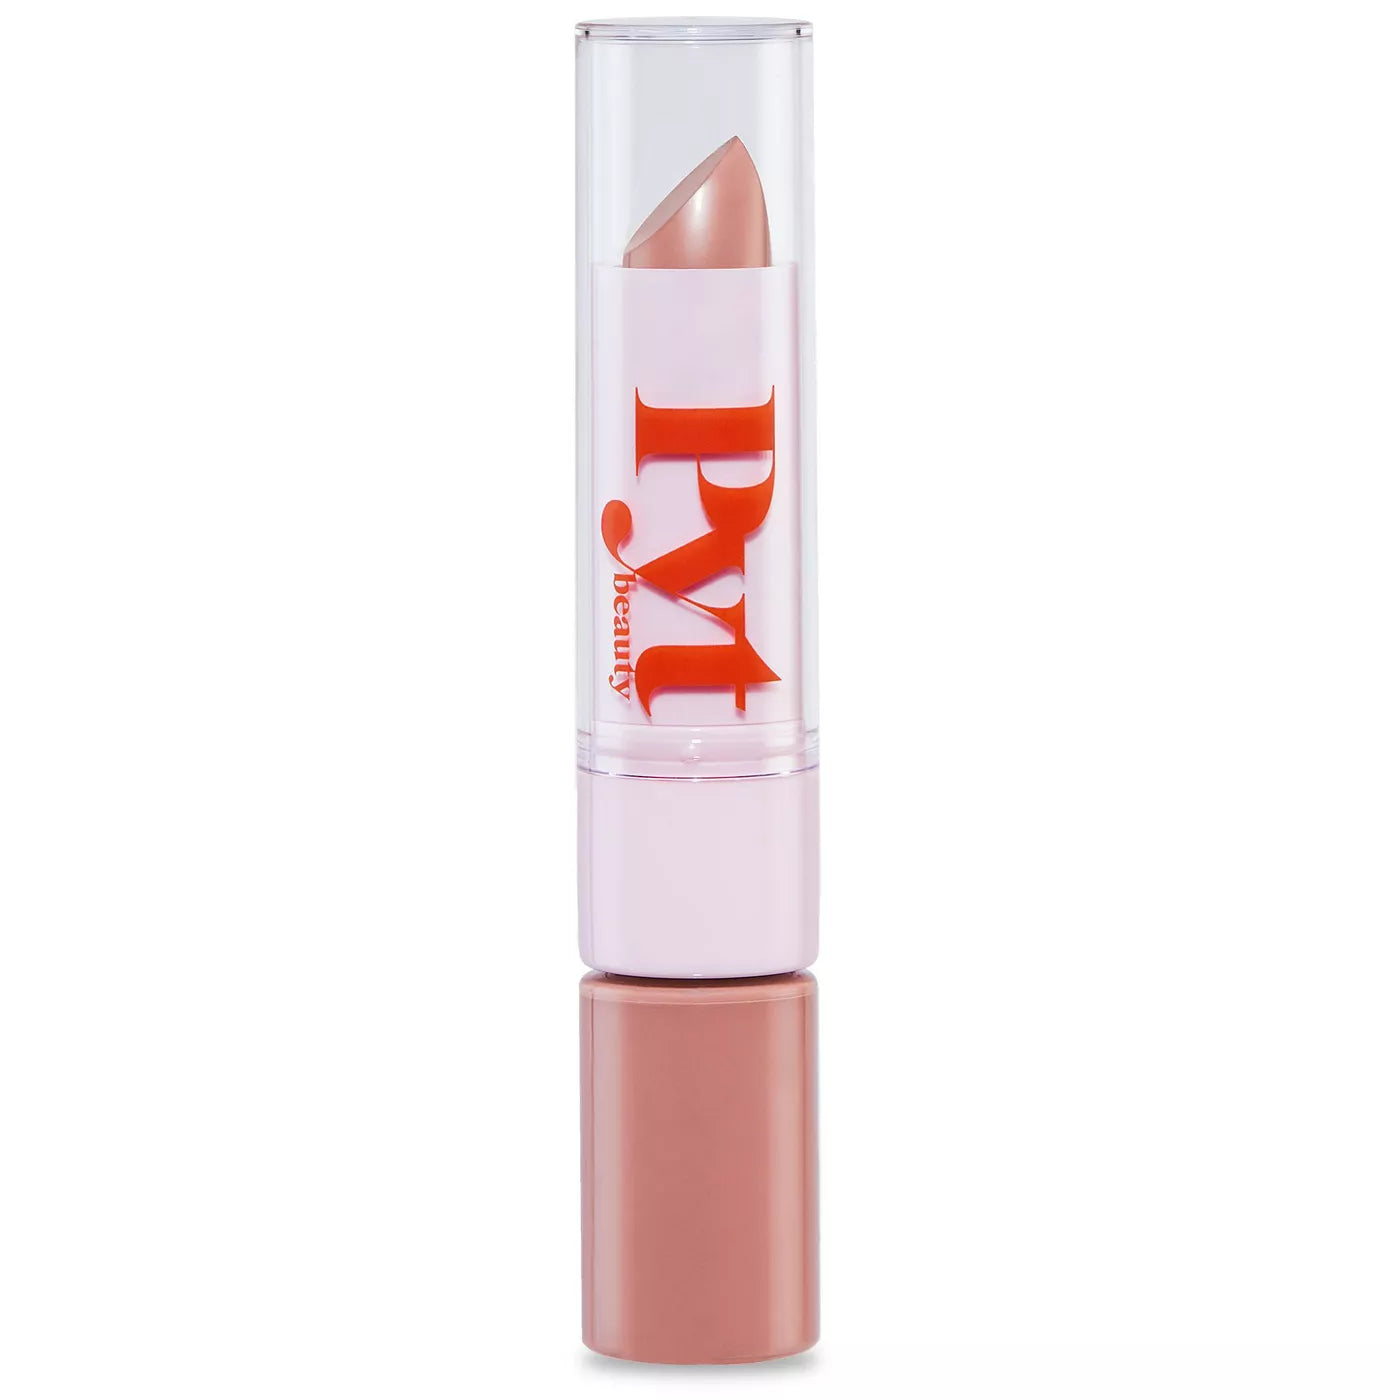 PYT Beauty Friends with Benefits Lipgloss and Lipstick Duo | Bare All